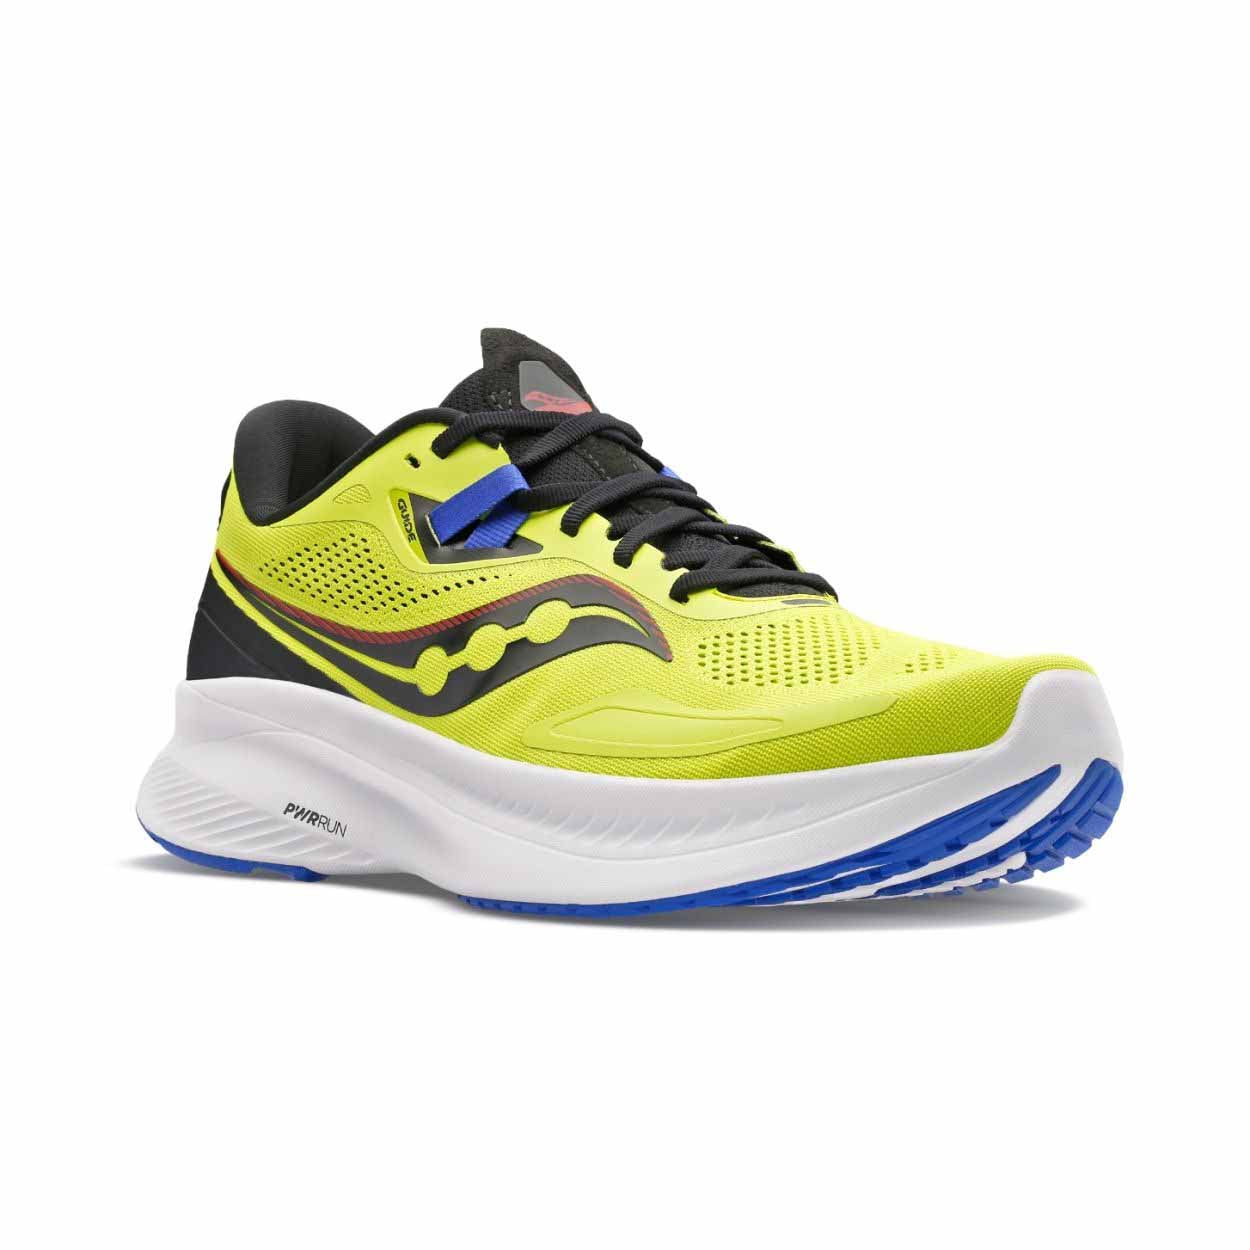 Saucony Guide 15 Mens Running Trainer